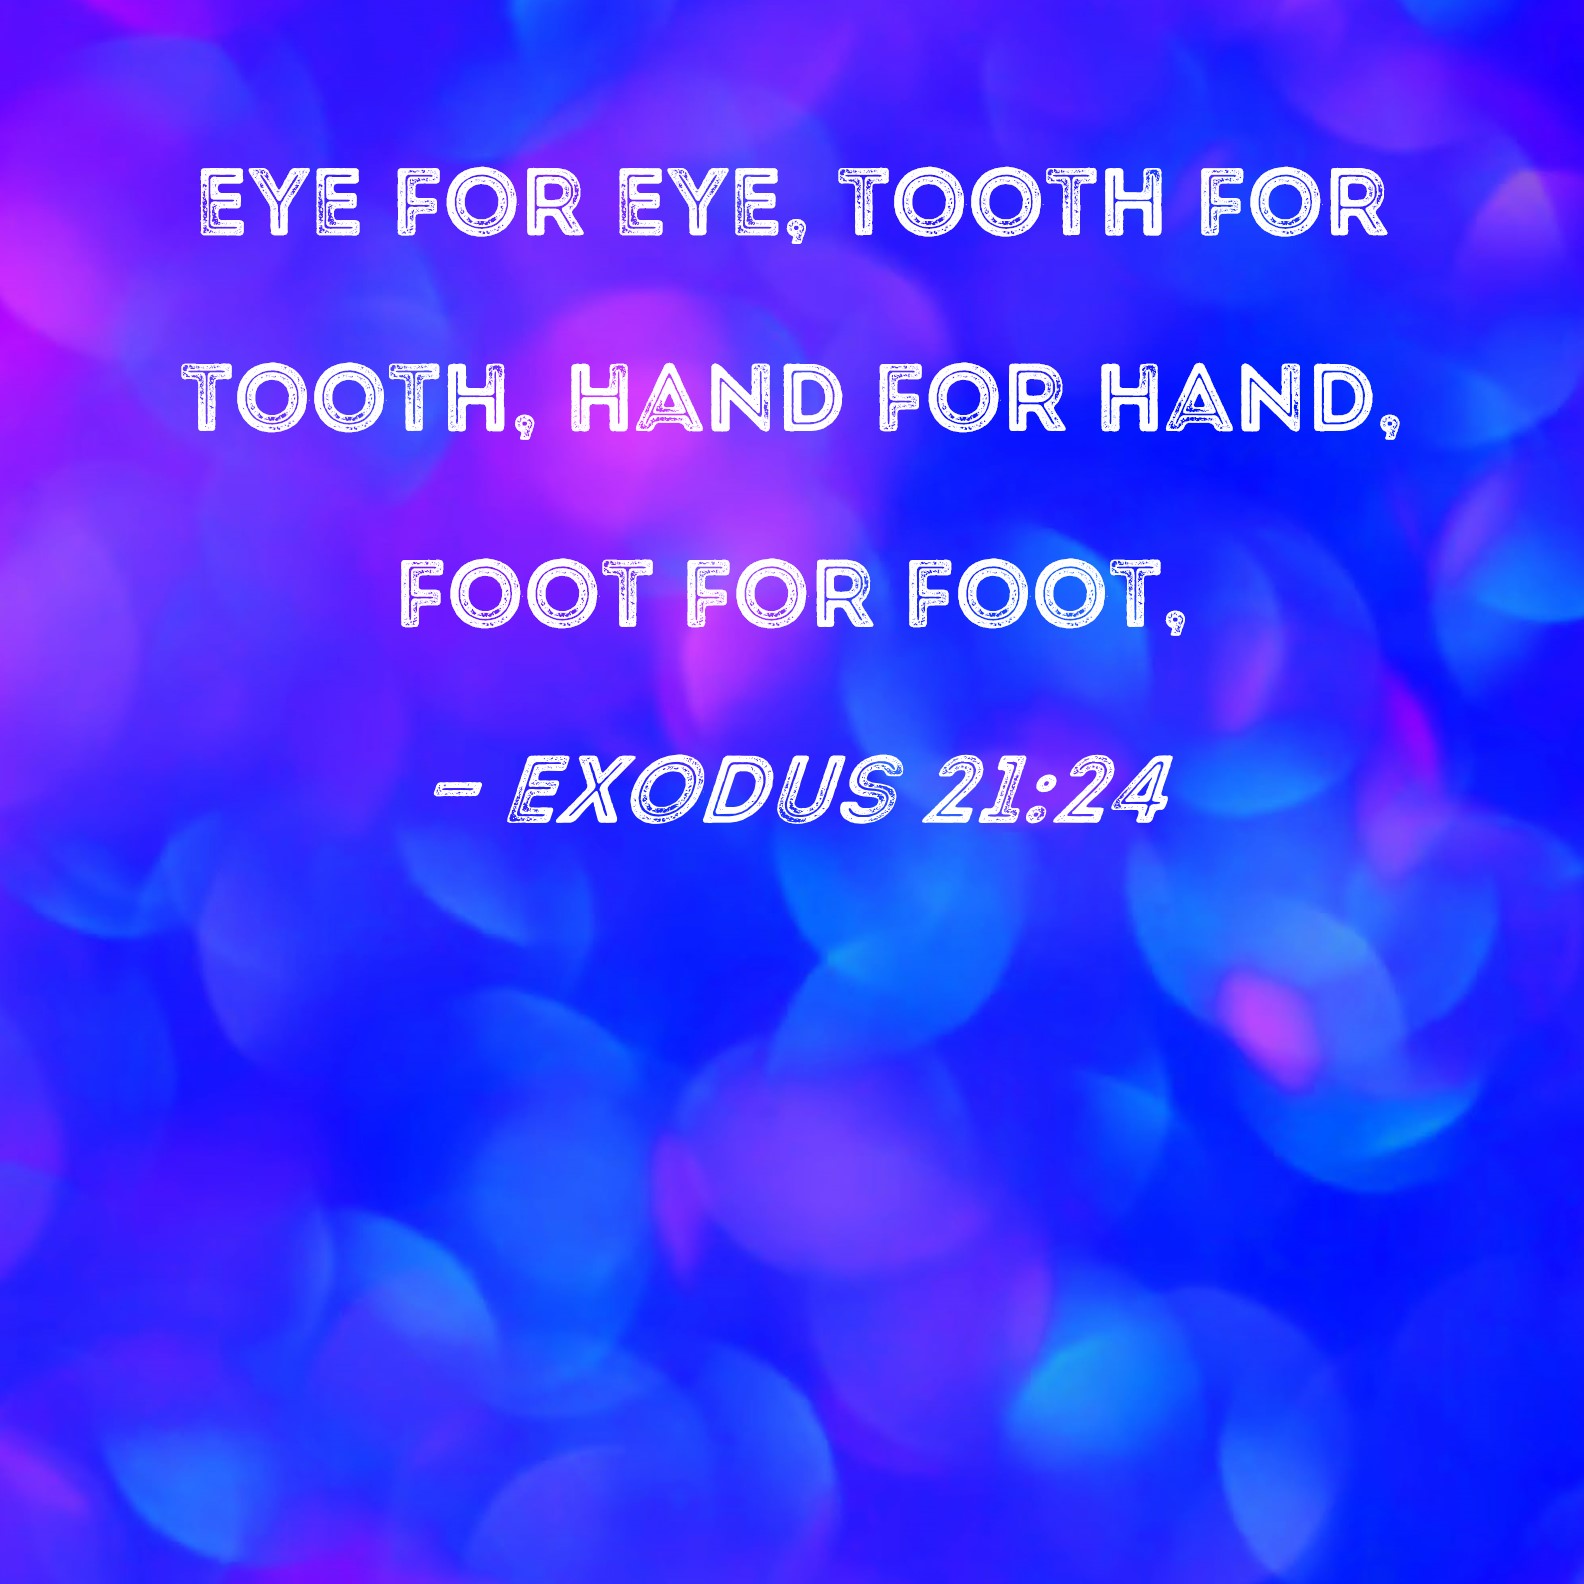 Exodus 21:24 eye for eye, tooth for tooth, hand for hand, foot for foot,